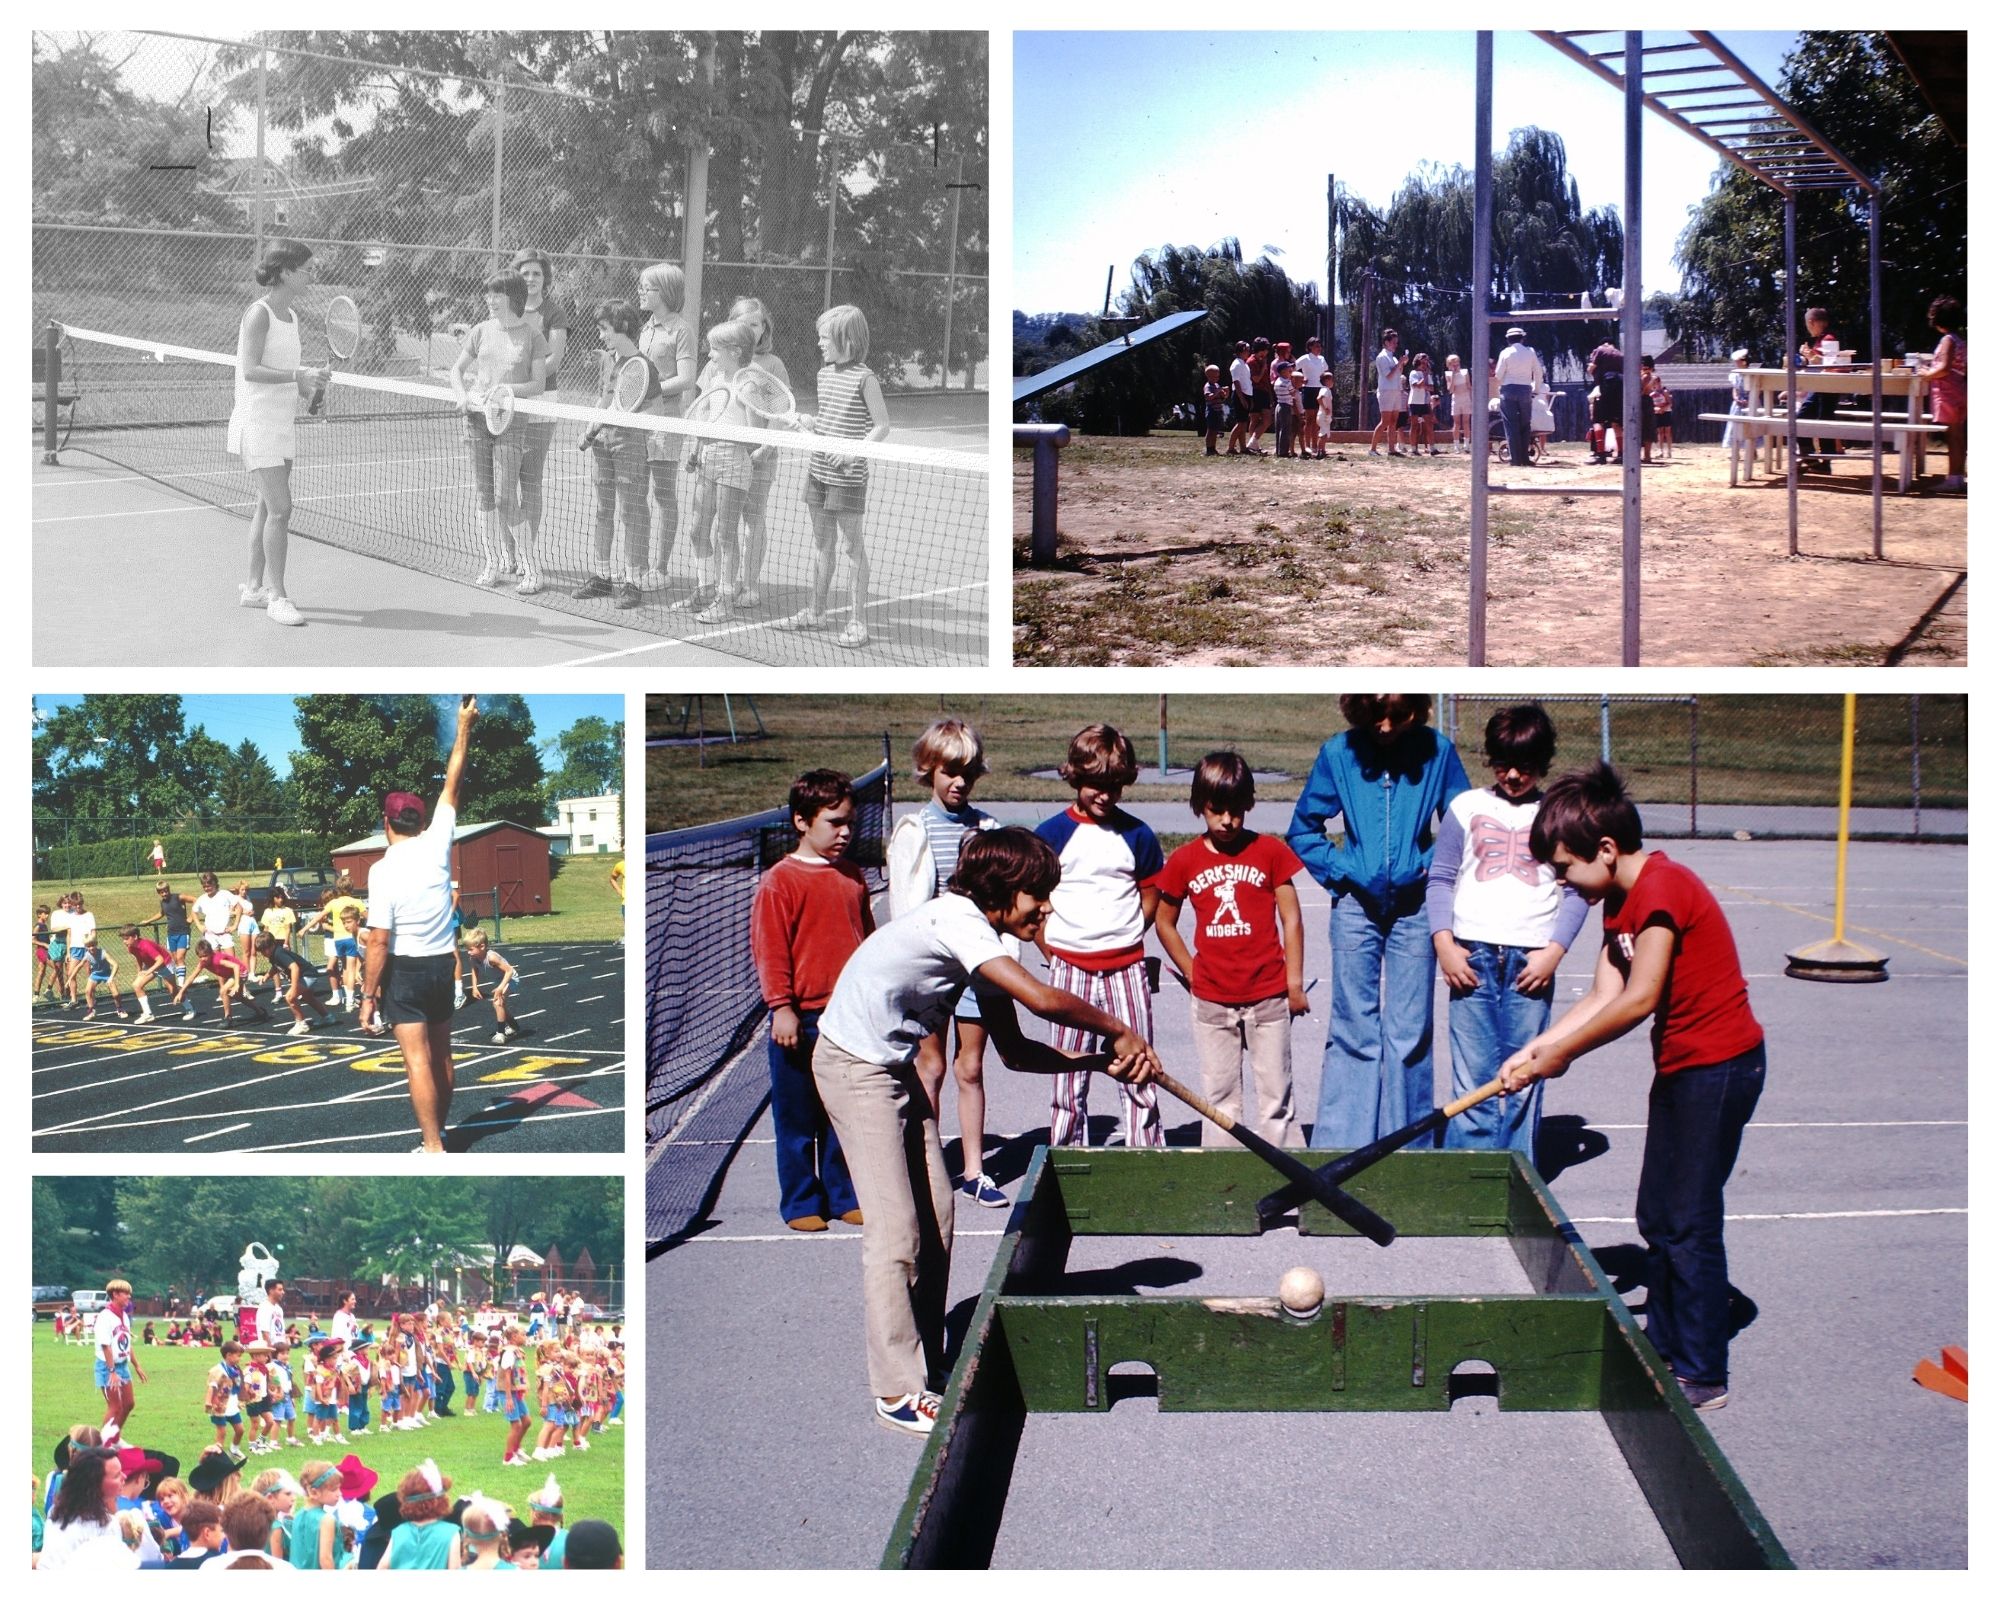 Collage of old photos from local Pennsylvania parks and recreation agencies throughout the years 